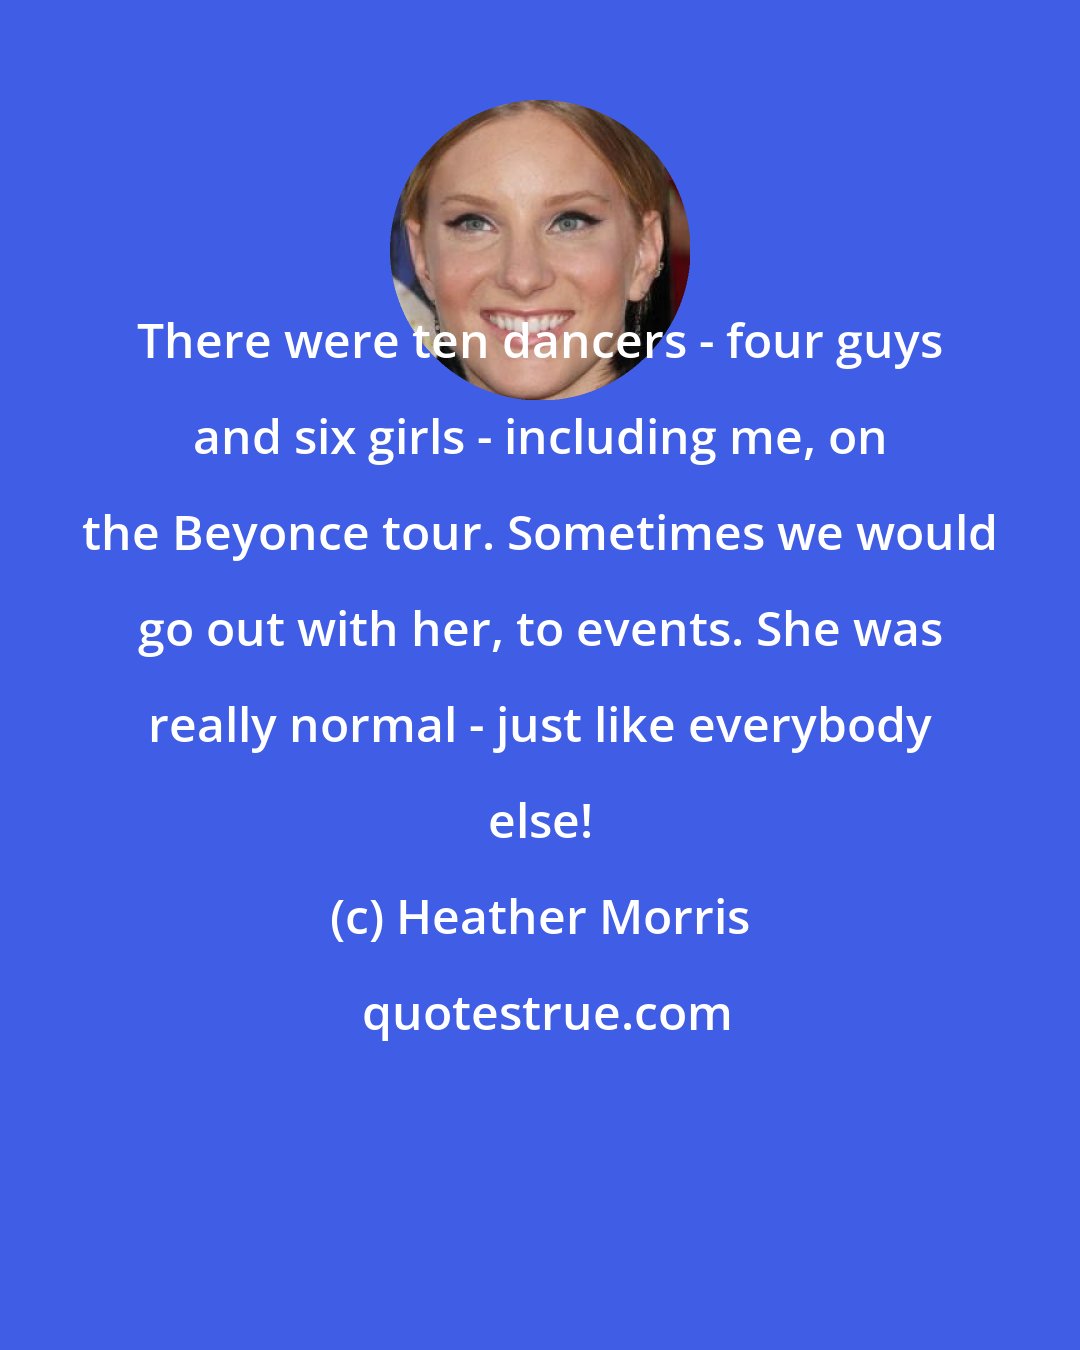 Heather Morris: There were ten dancers - four guys and six girls - including me, on the Beyonce tour. Sometimes we would go out with her, to events. She was really normal - just like everybody else!